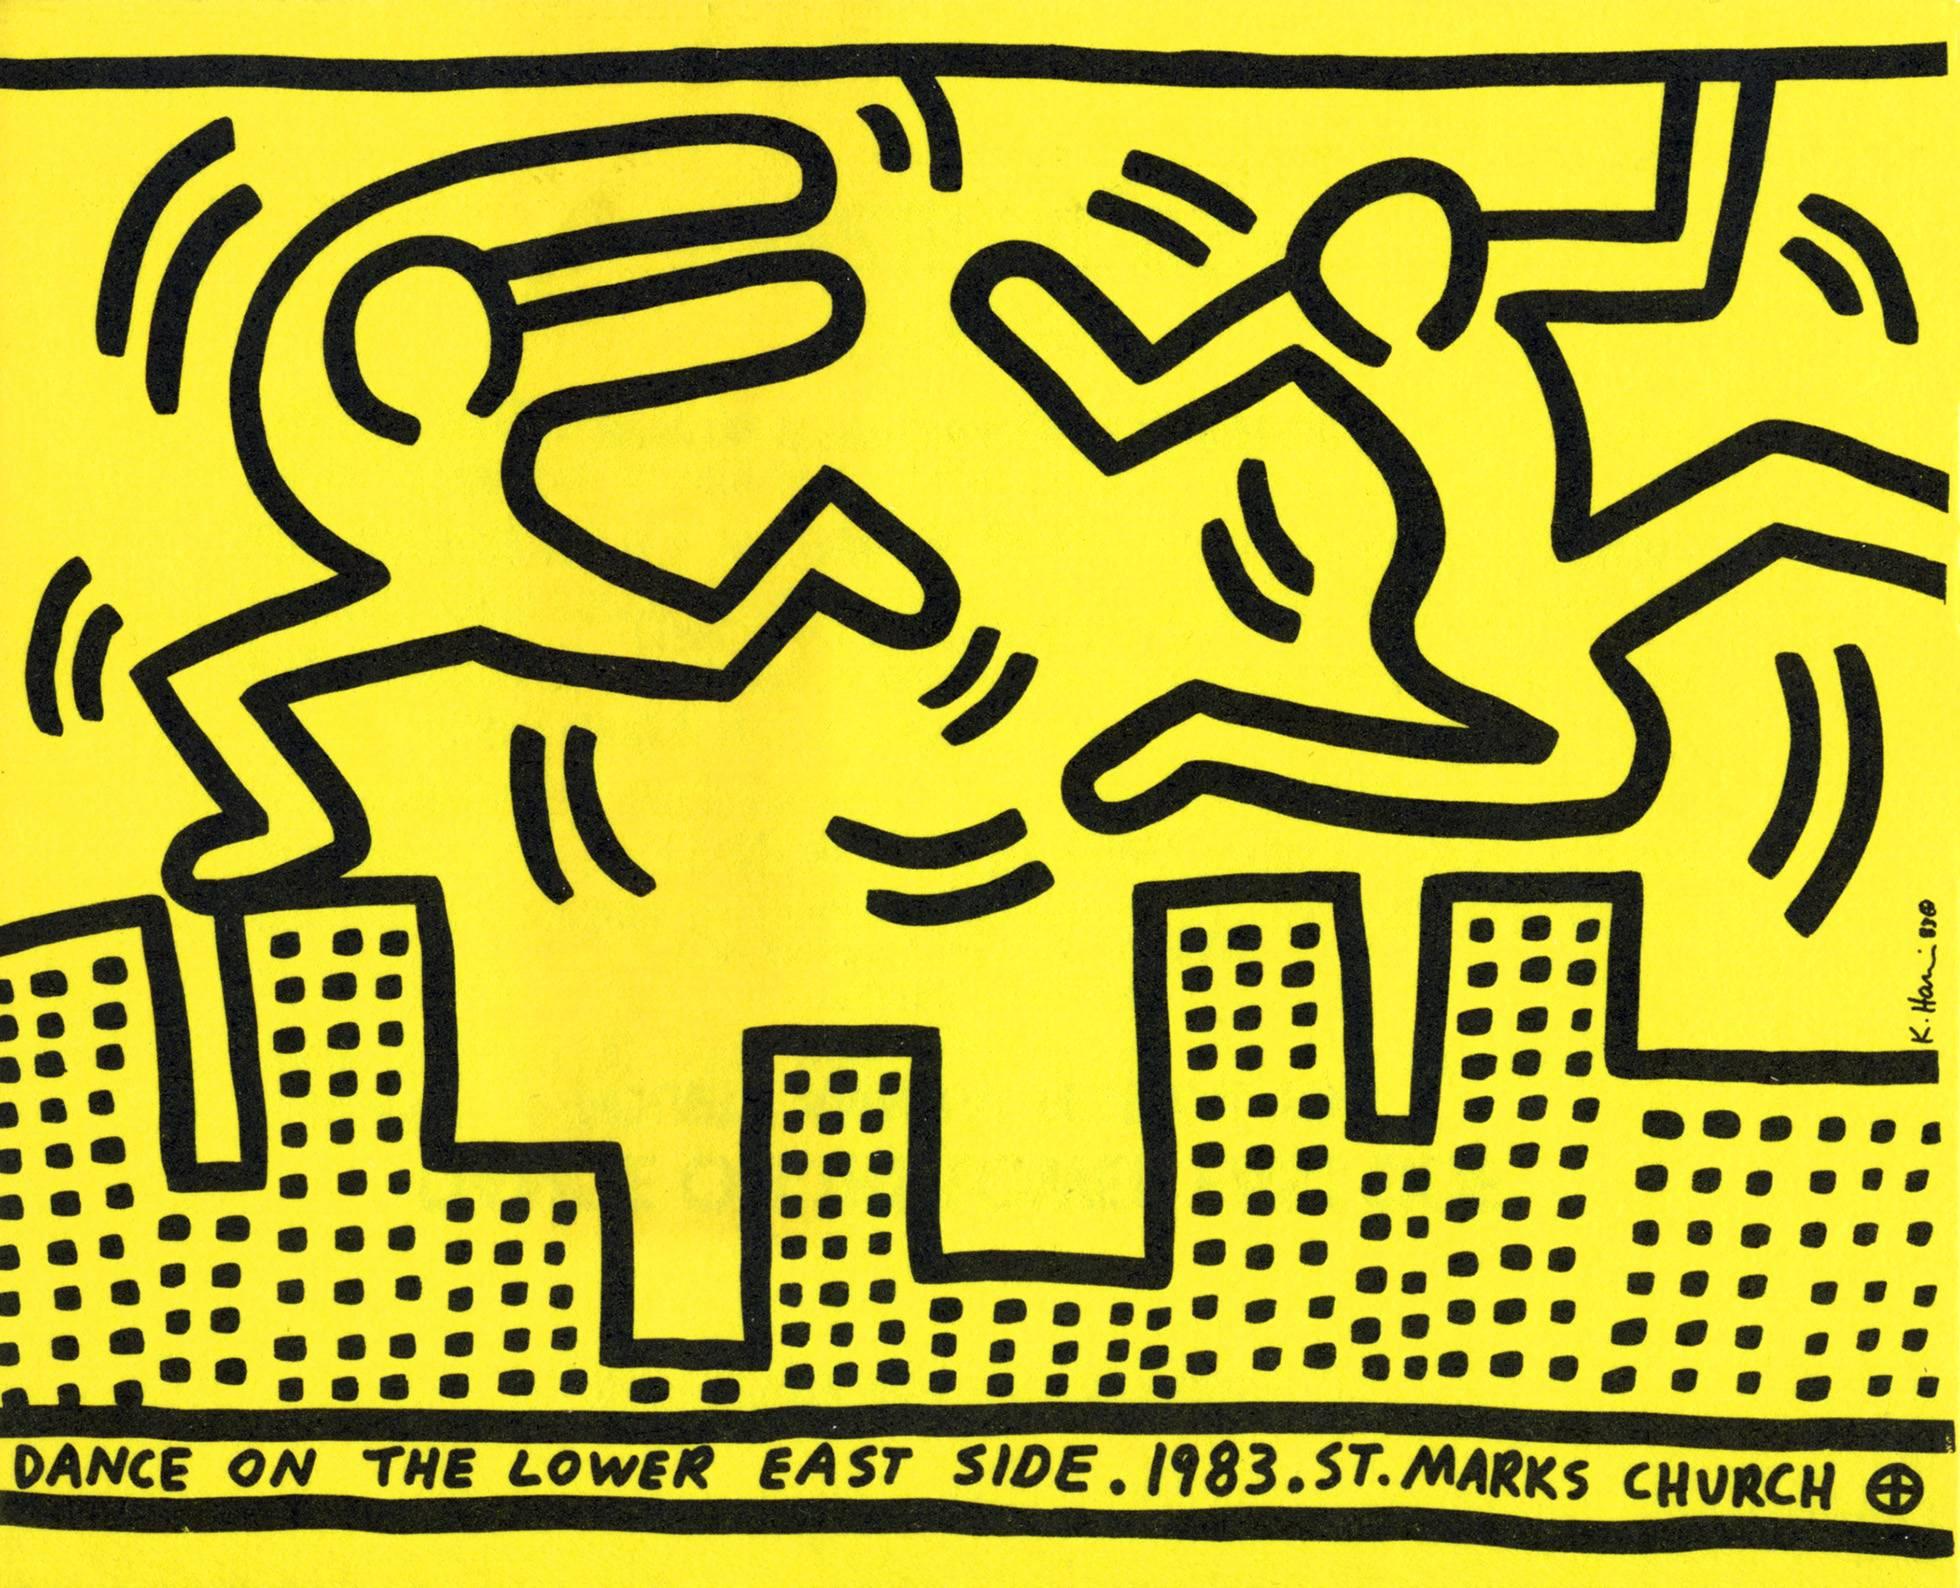 Dance on the Lower East Side, St. Marks Church  - Art by Keith Haring